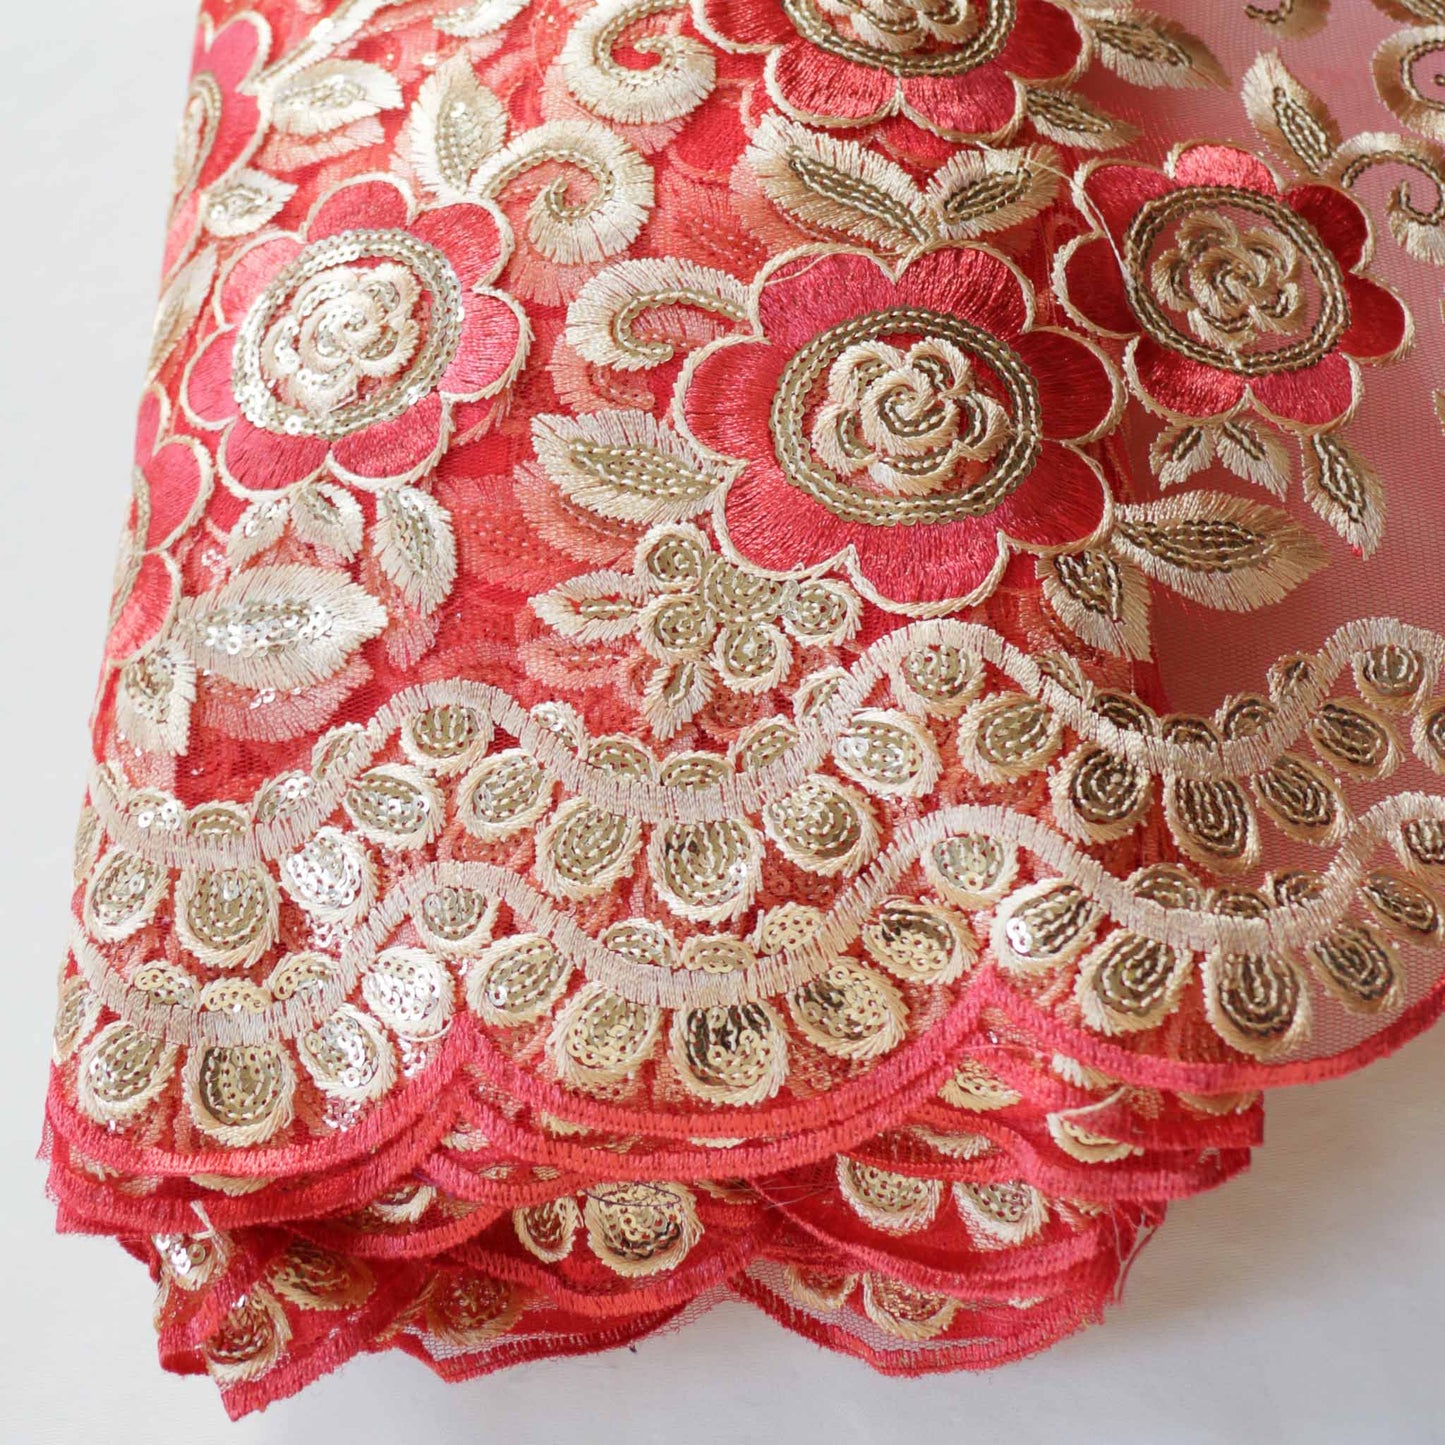 gold elegant embroidery on red lace dressmaking Indian inspired fabric